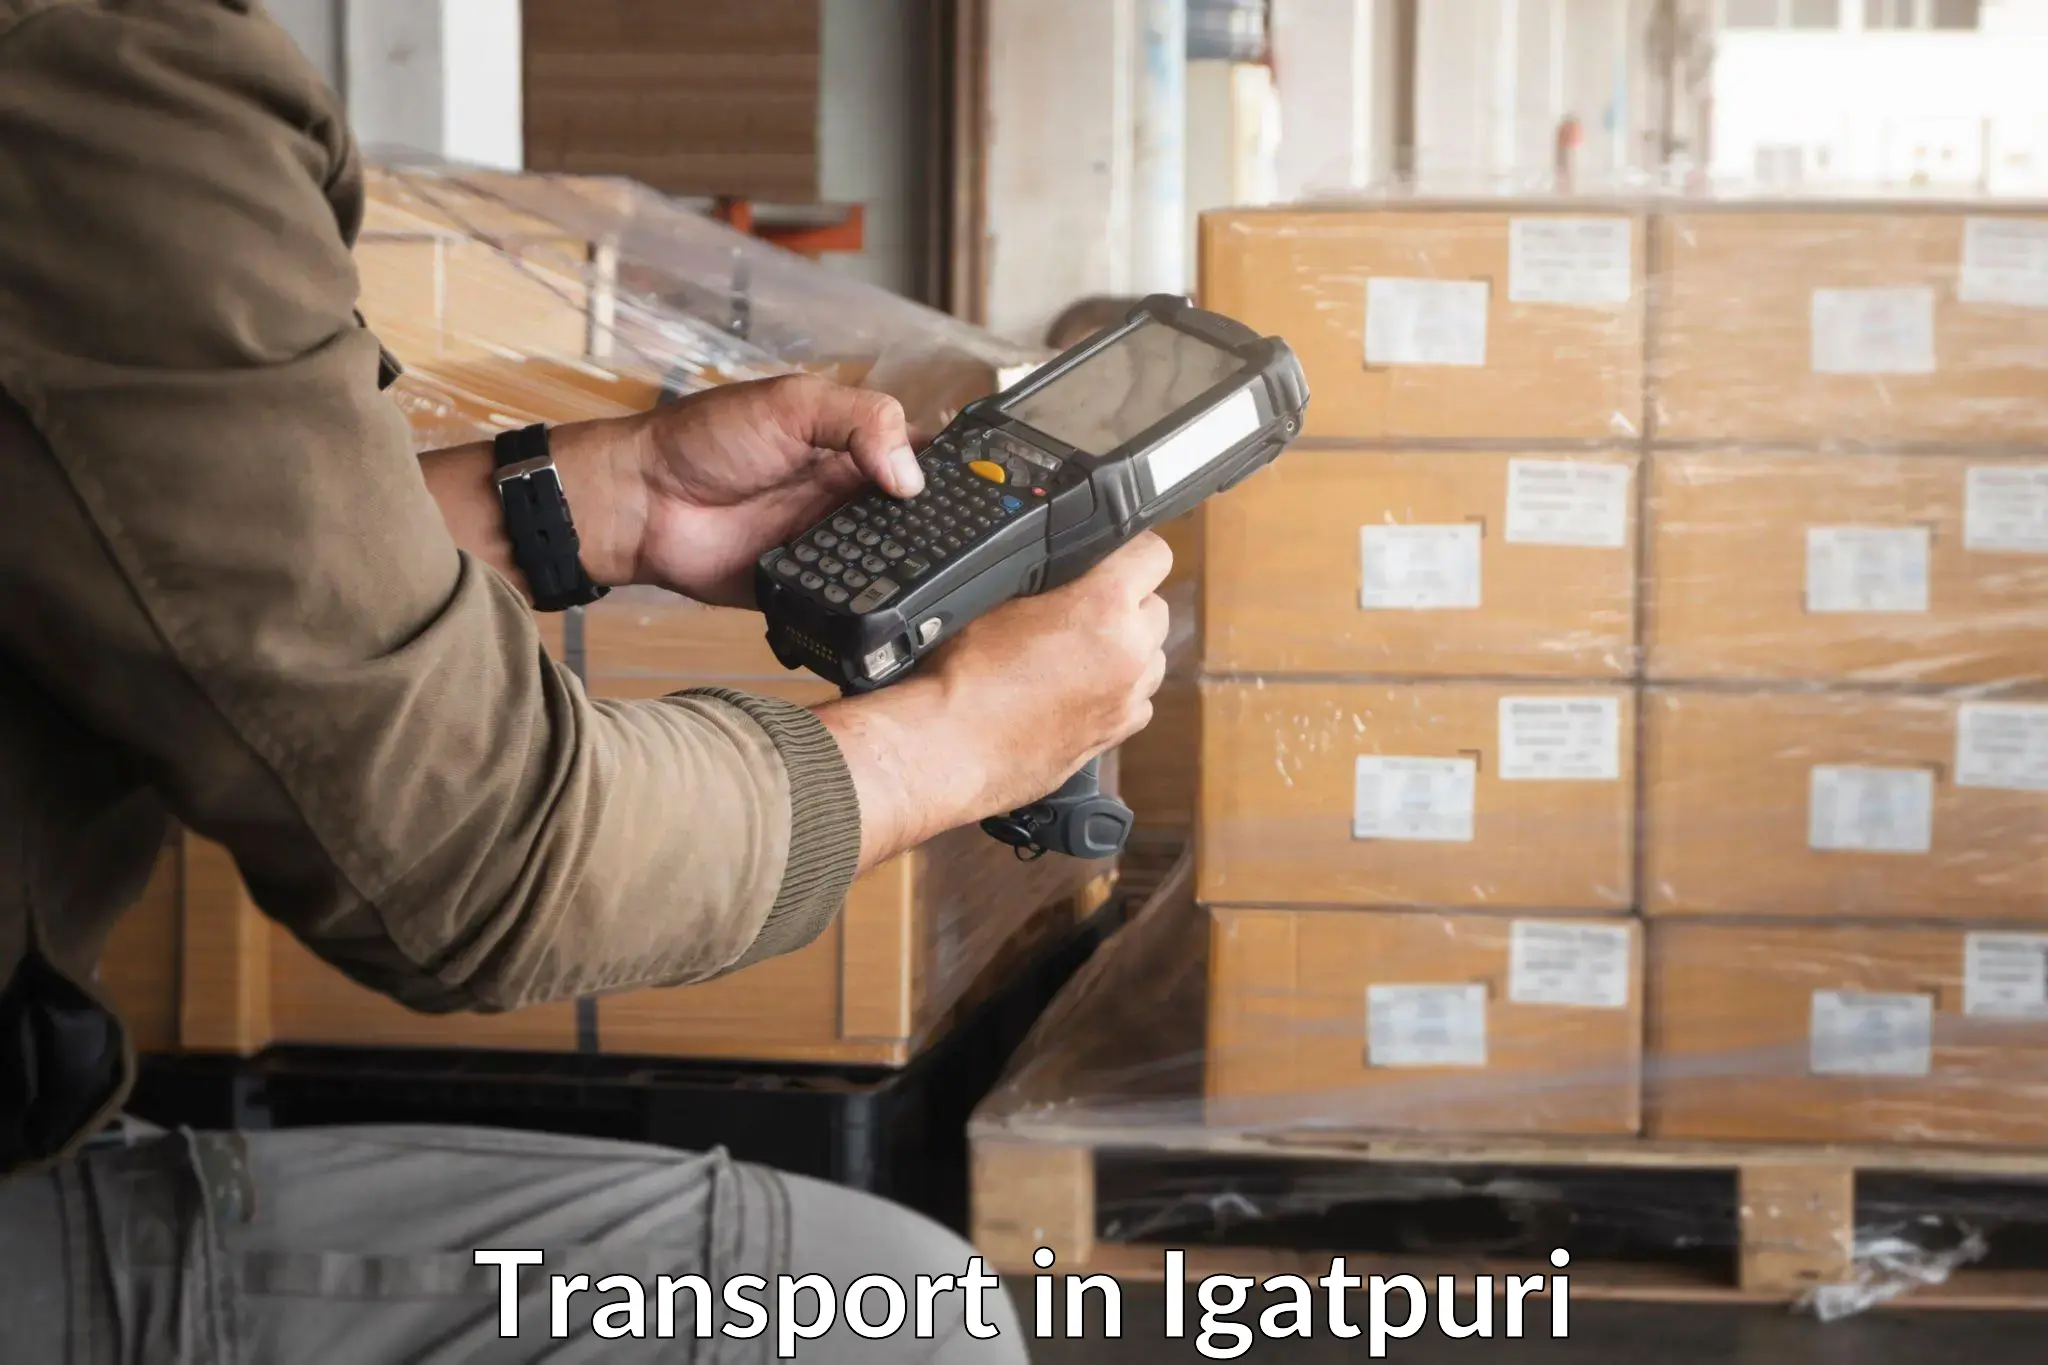 Goods delivery service in Igatpuri